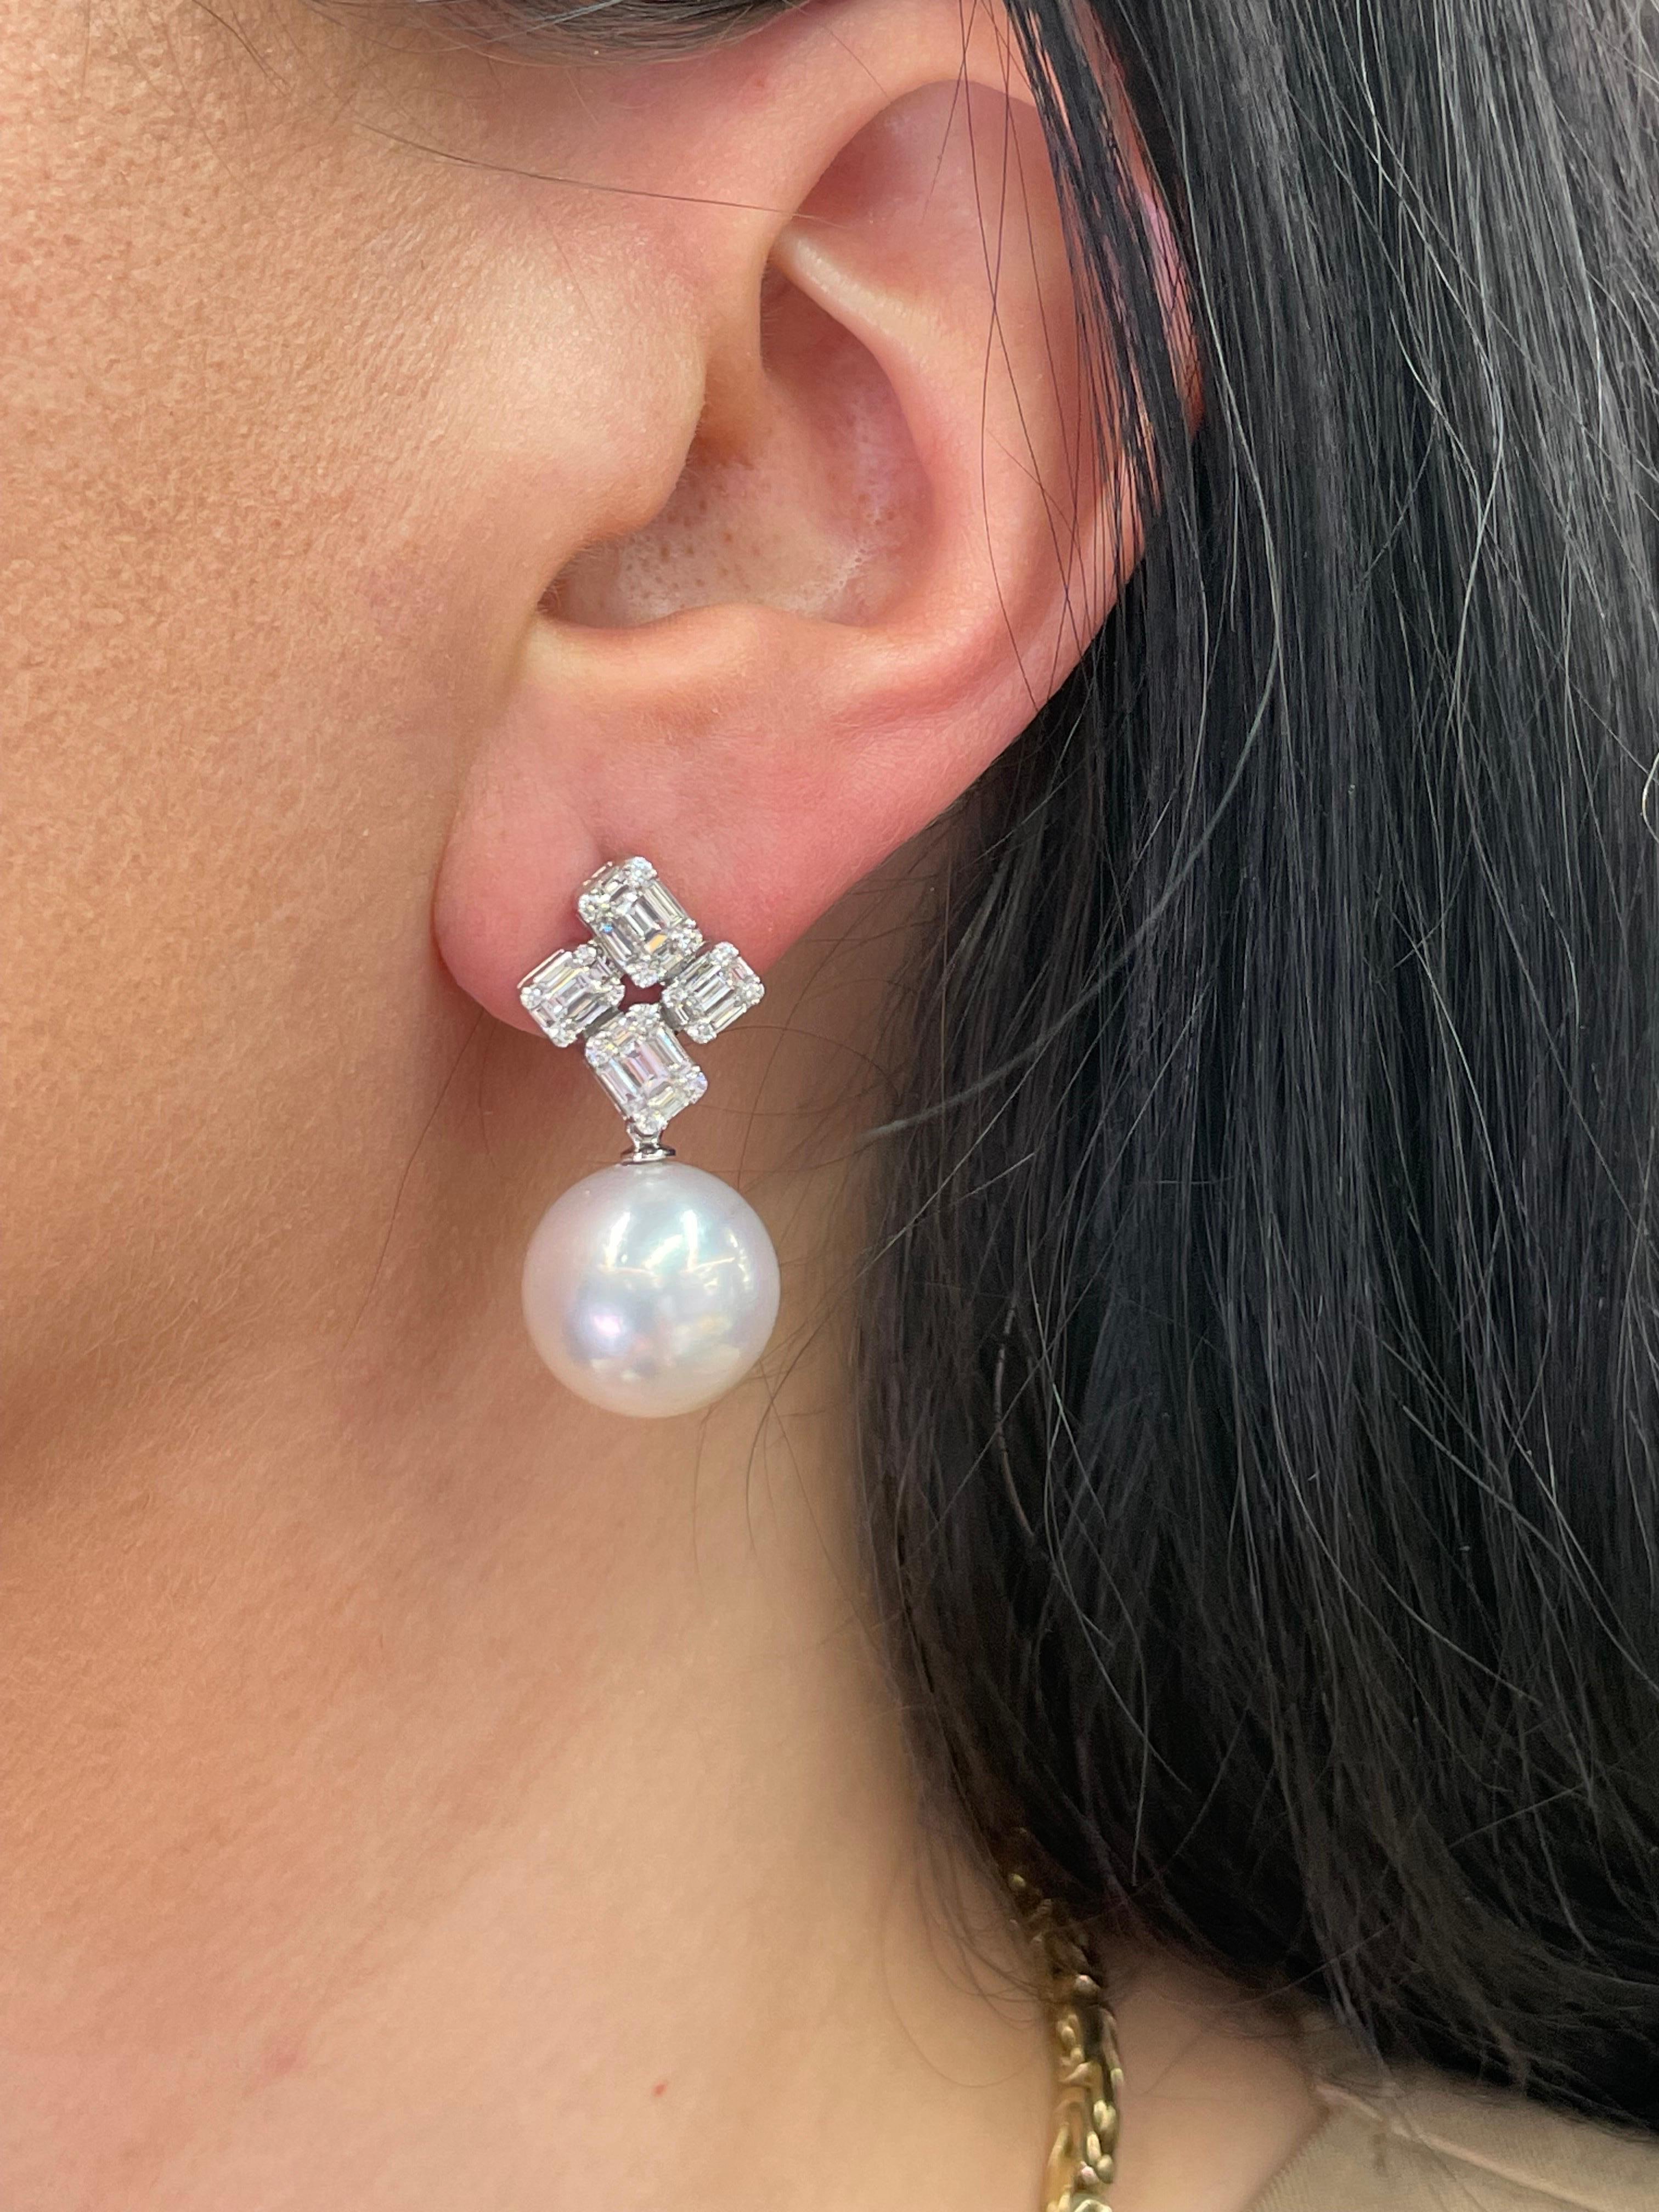 18 Karat White gold drop earrings featuring 40 Baguette Diamonds weighing 1.25 Carats and 32 Round Brilliants weighing 0.27 Carats with two South Sea Pearls measuring 13-14 MM.

Color G-H
Clarity SI

Pearls can be changed to South Sea, Pink, Gold or